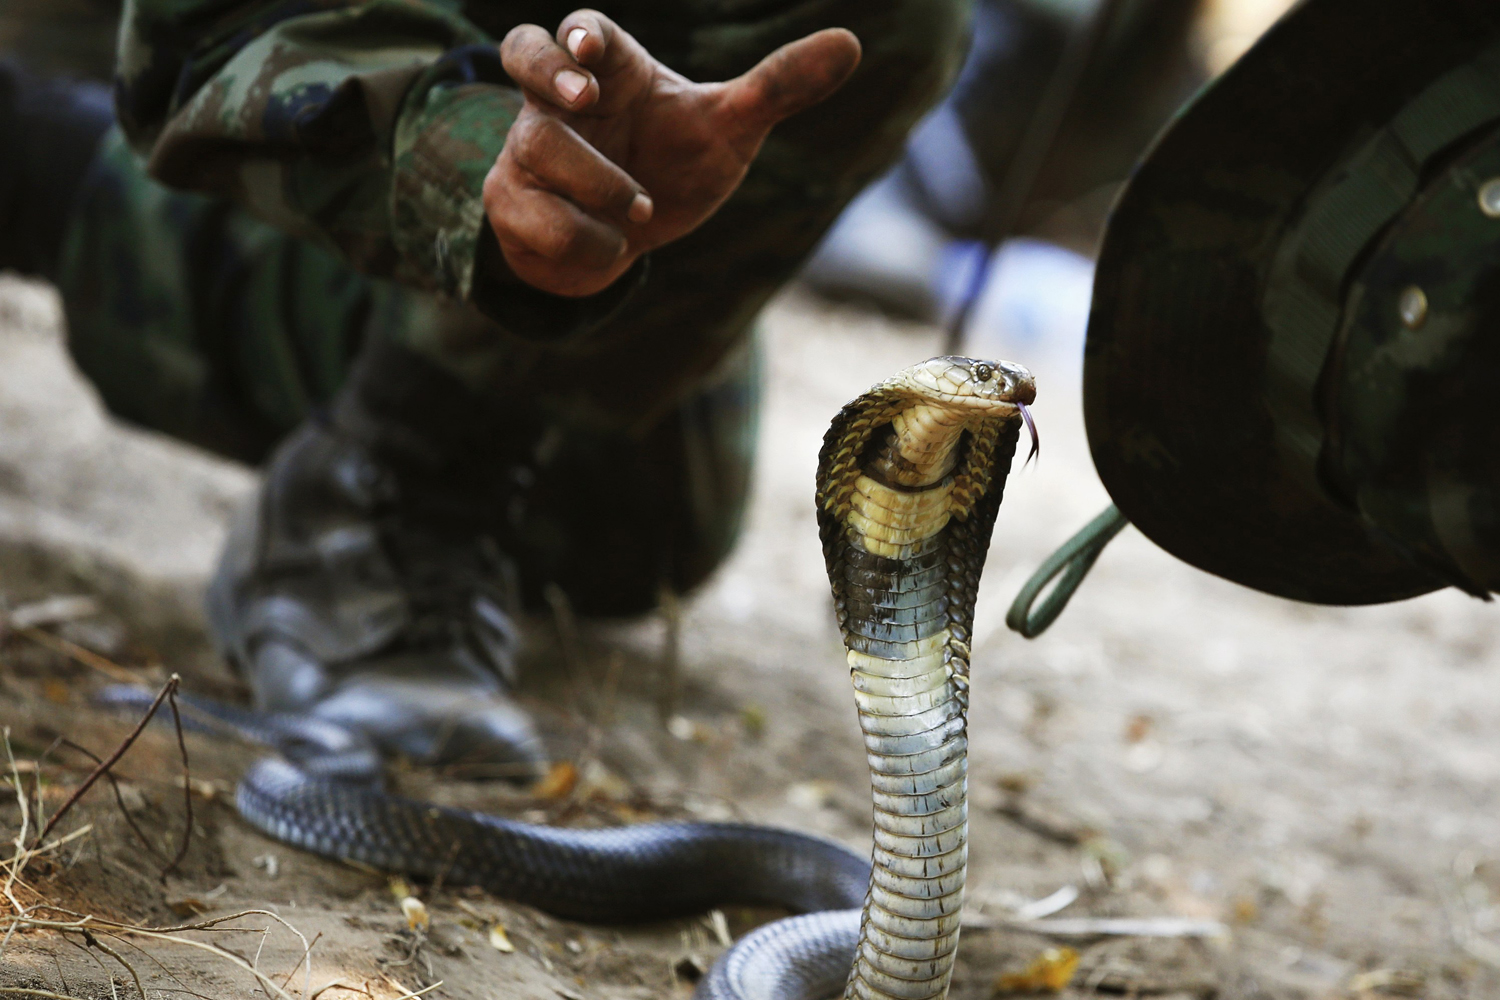 A Thai Navy instructor demonstrates to U.S. Marines how to catch a cobra during a jungle survival exercise in Chon Buri province